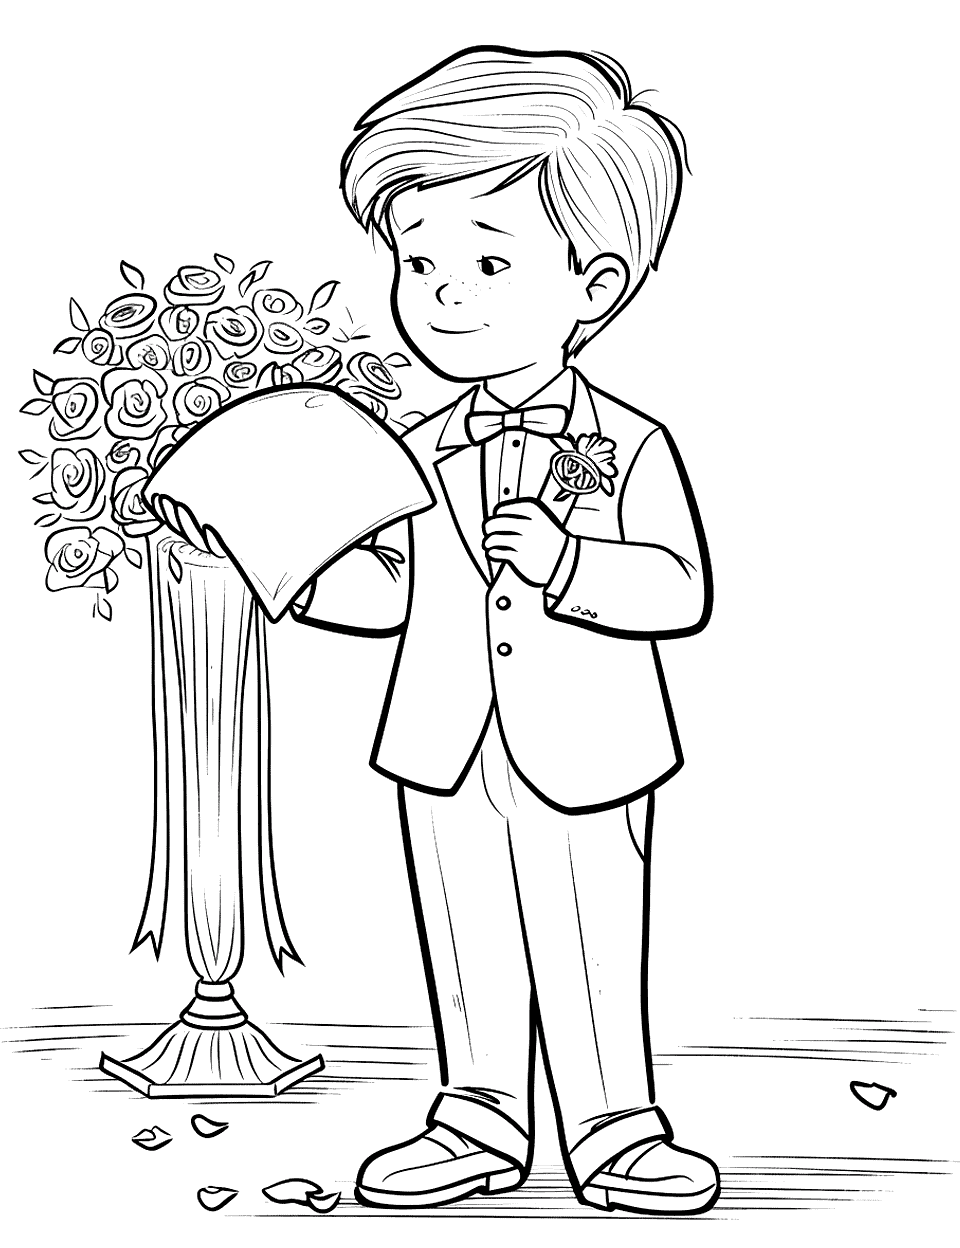 Ring Bearer's Big Moment Wedding Coloring Page - A little boy in a suit, carefully holding a pillow with wedding rings.